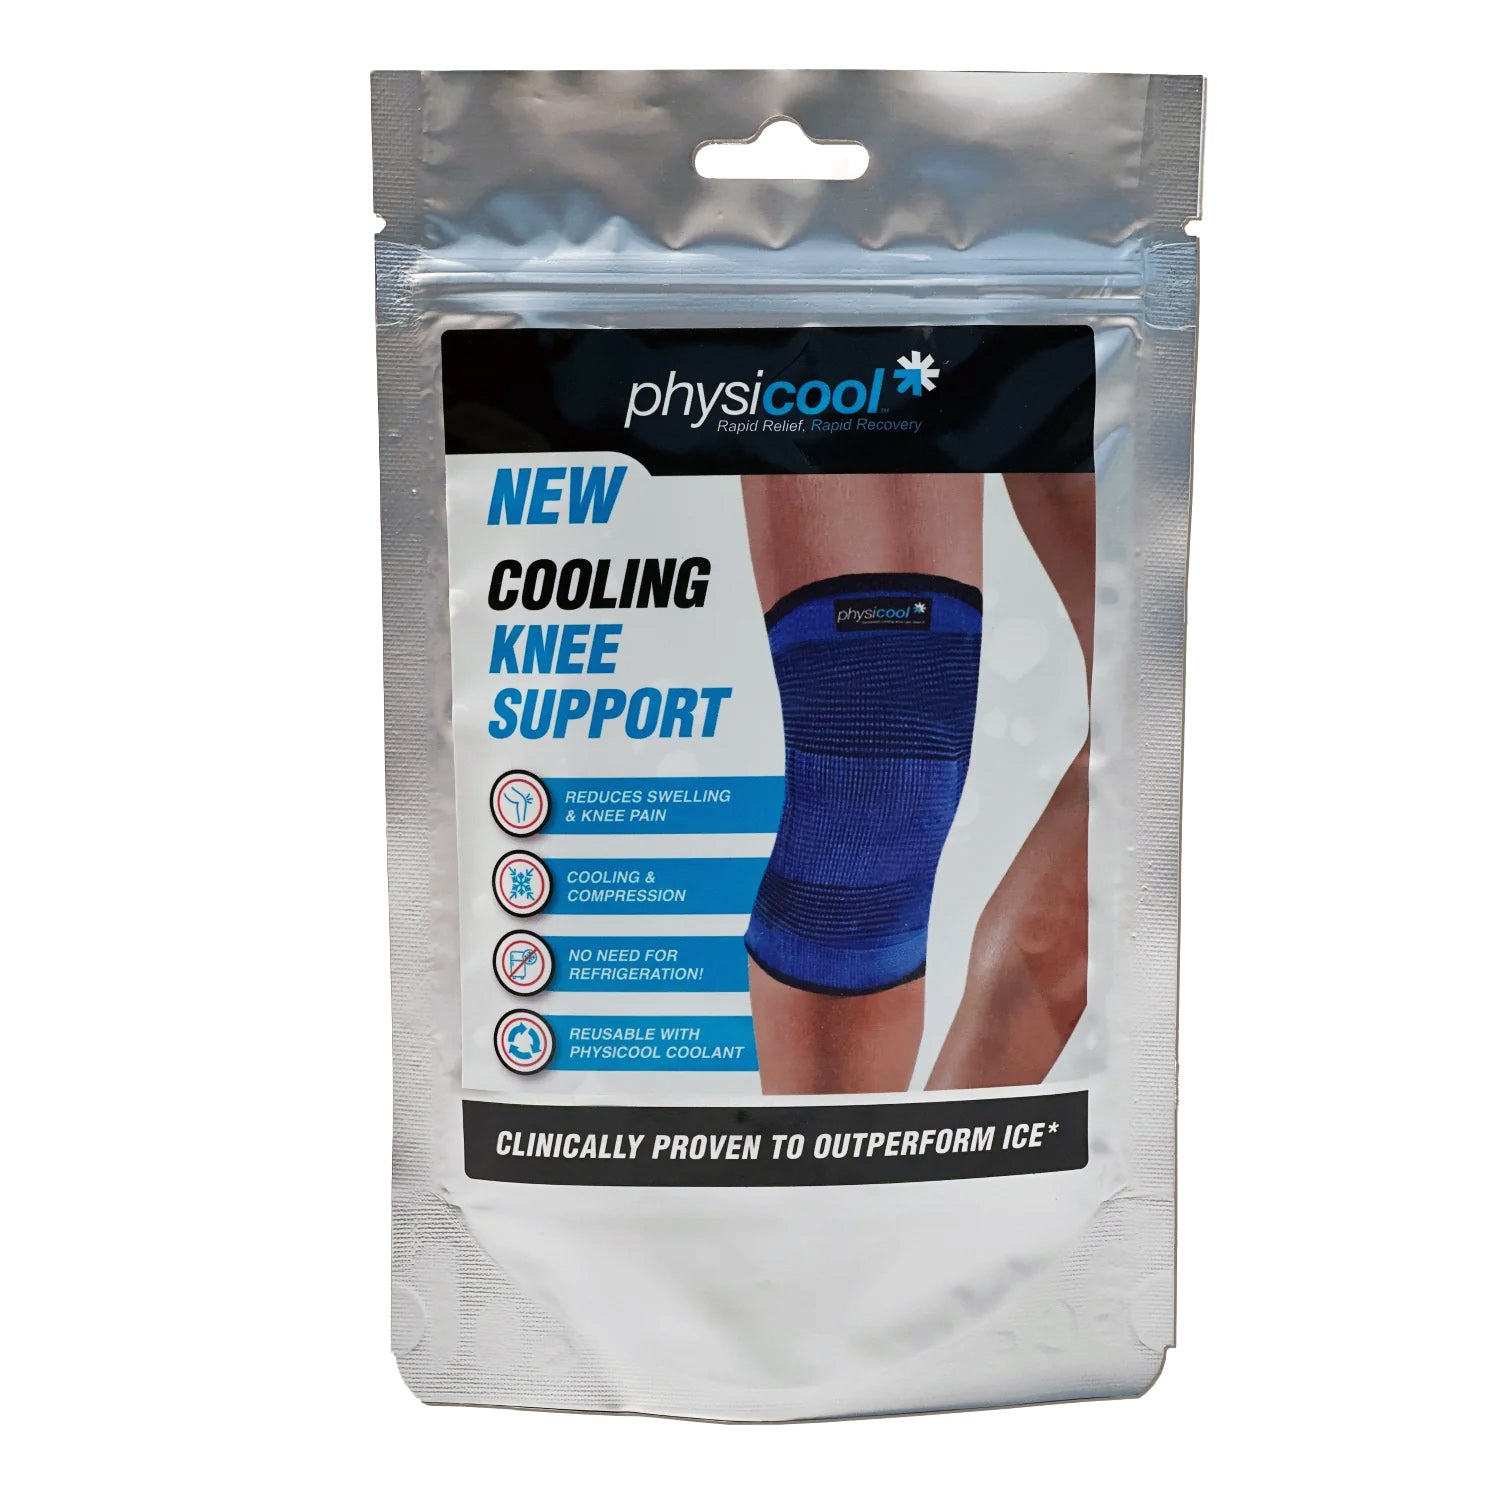 Physicool Cooling Knee Support